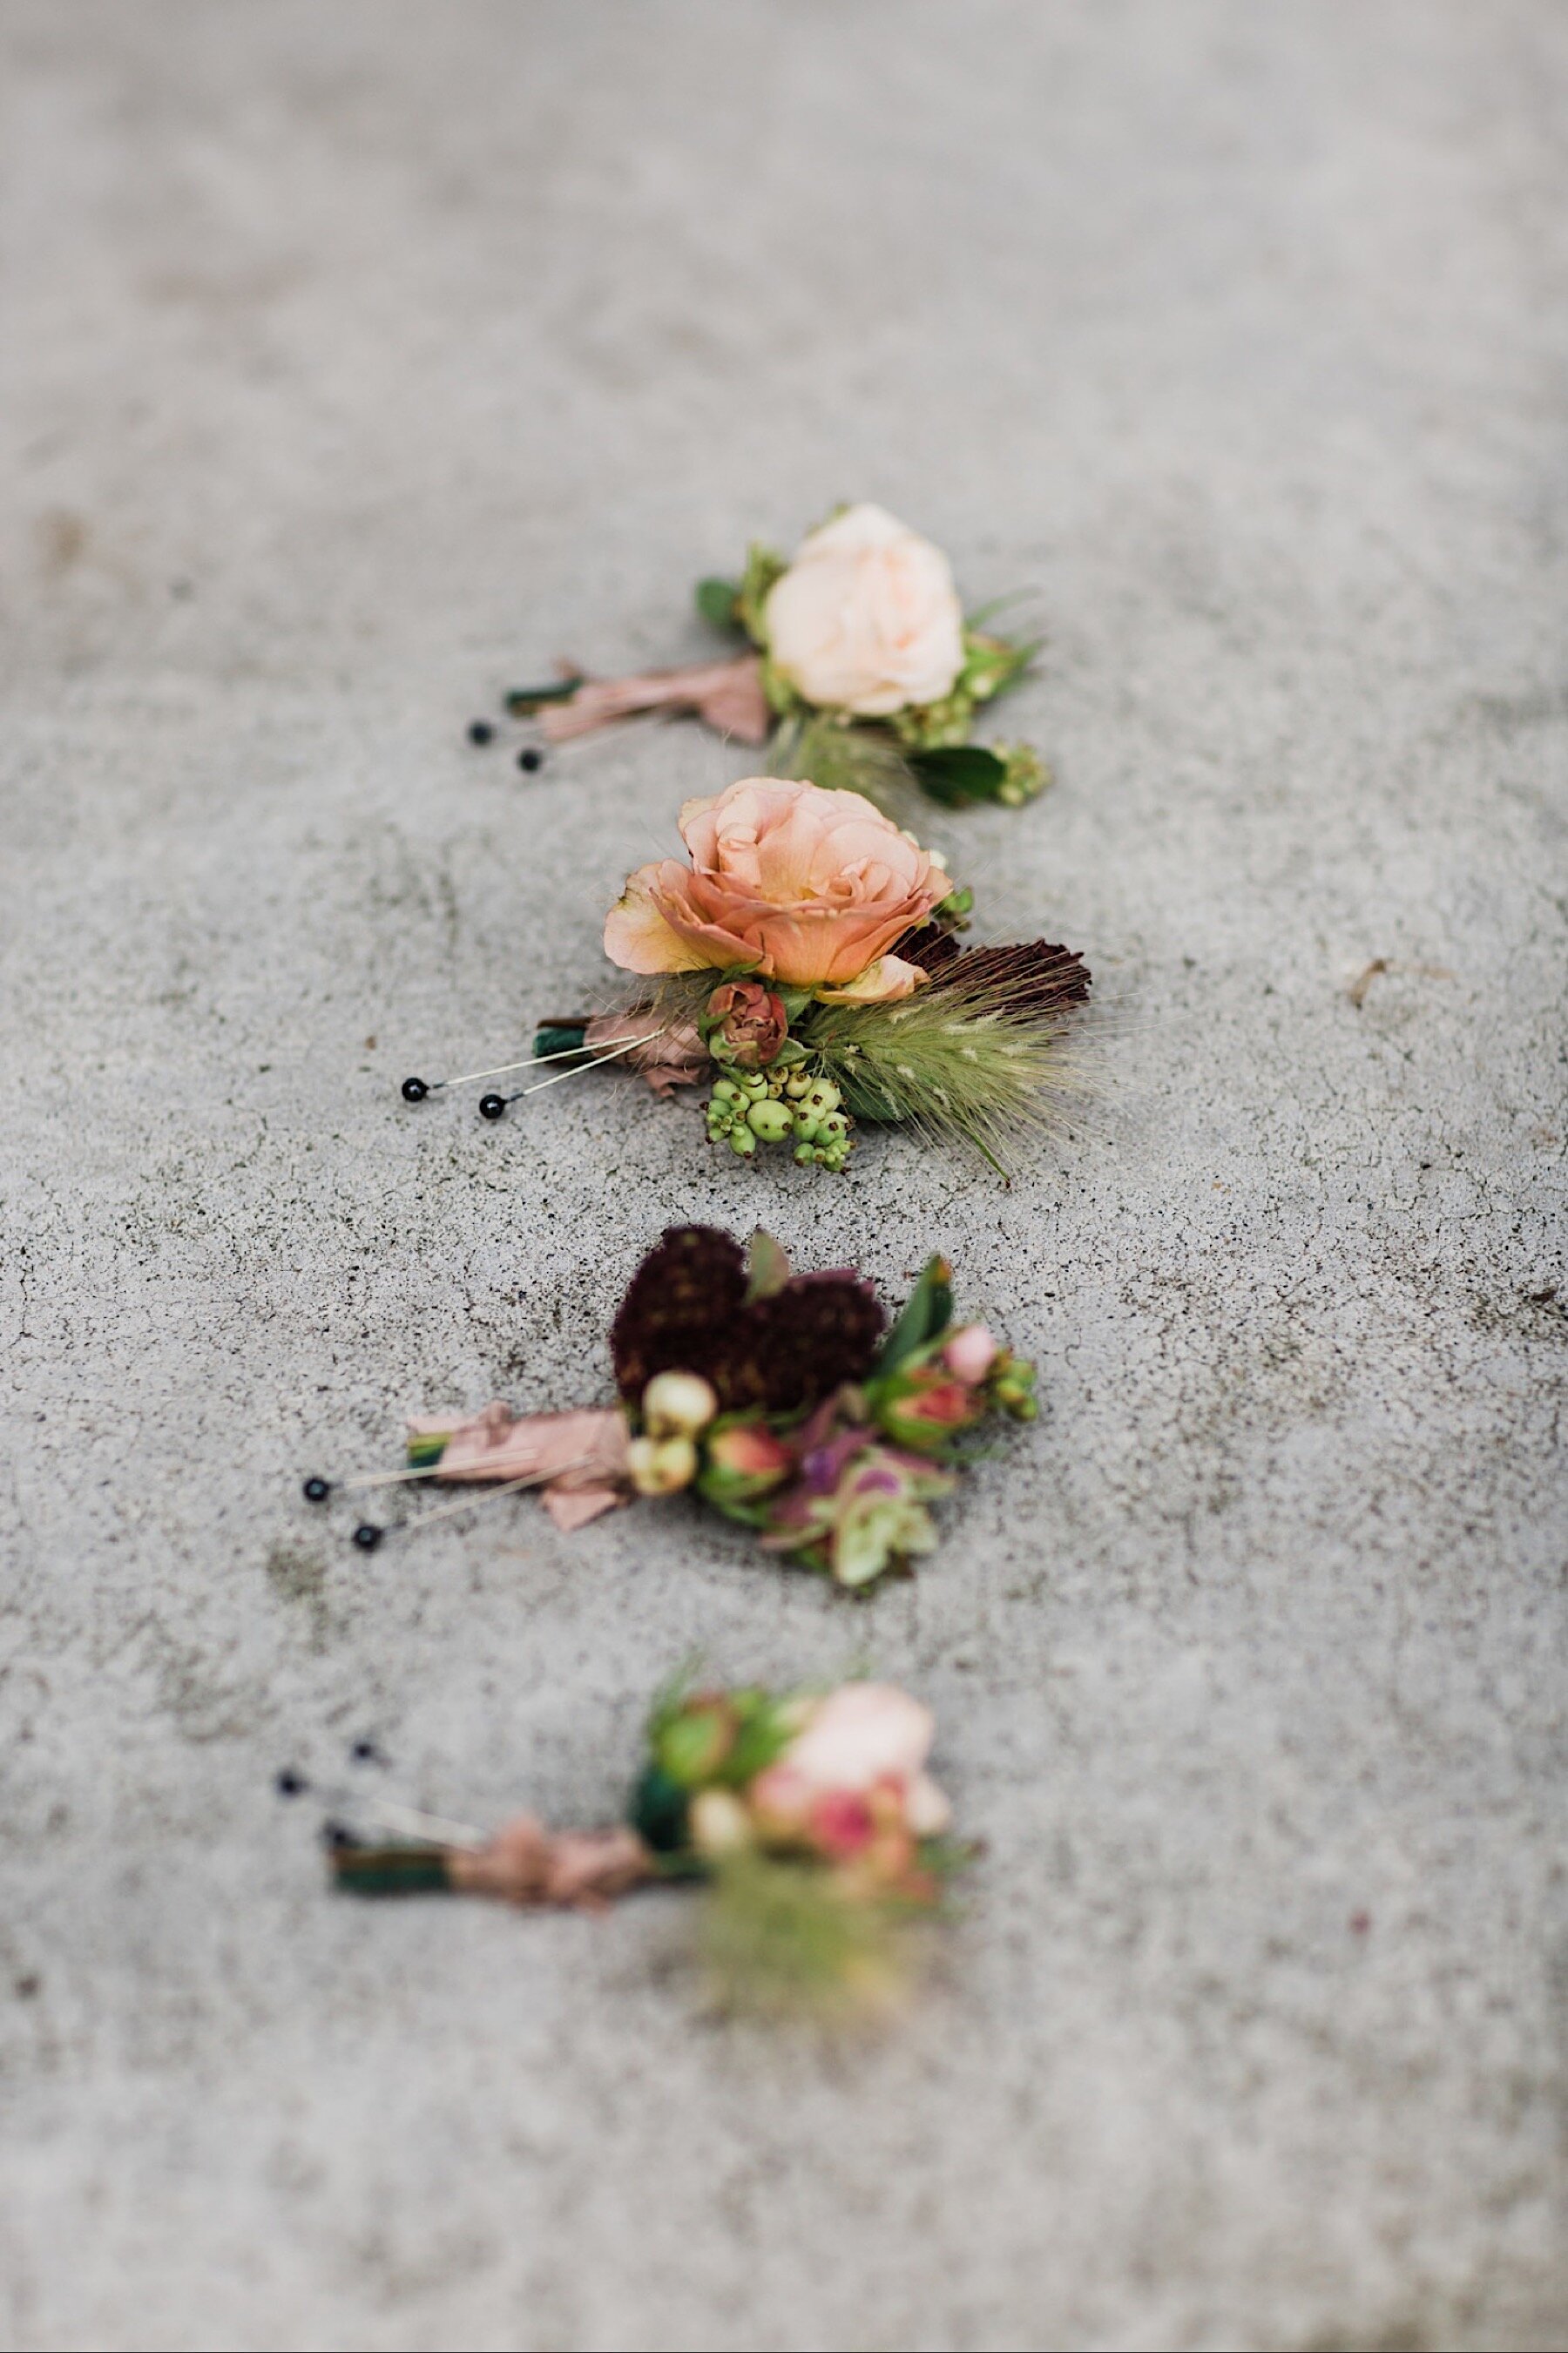 01_shaxton-ngo-059_A_Woodmark_floral_top_with_Florist_Gather_Design_from_Company_at_romantic_the_wedding_lush_Seattle_Wedding_design_Hotel.jpg